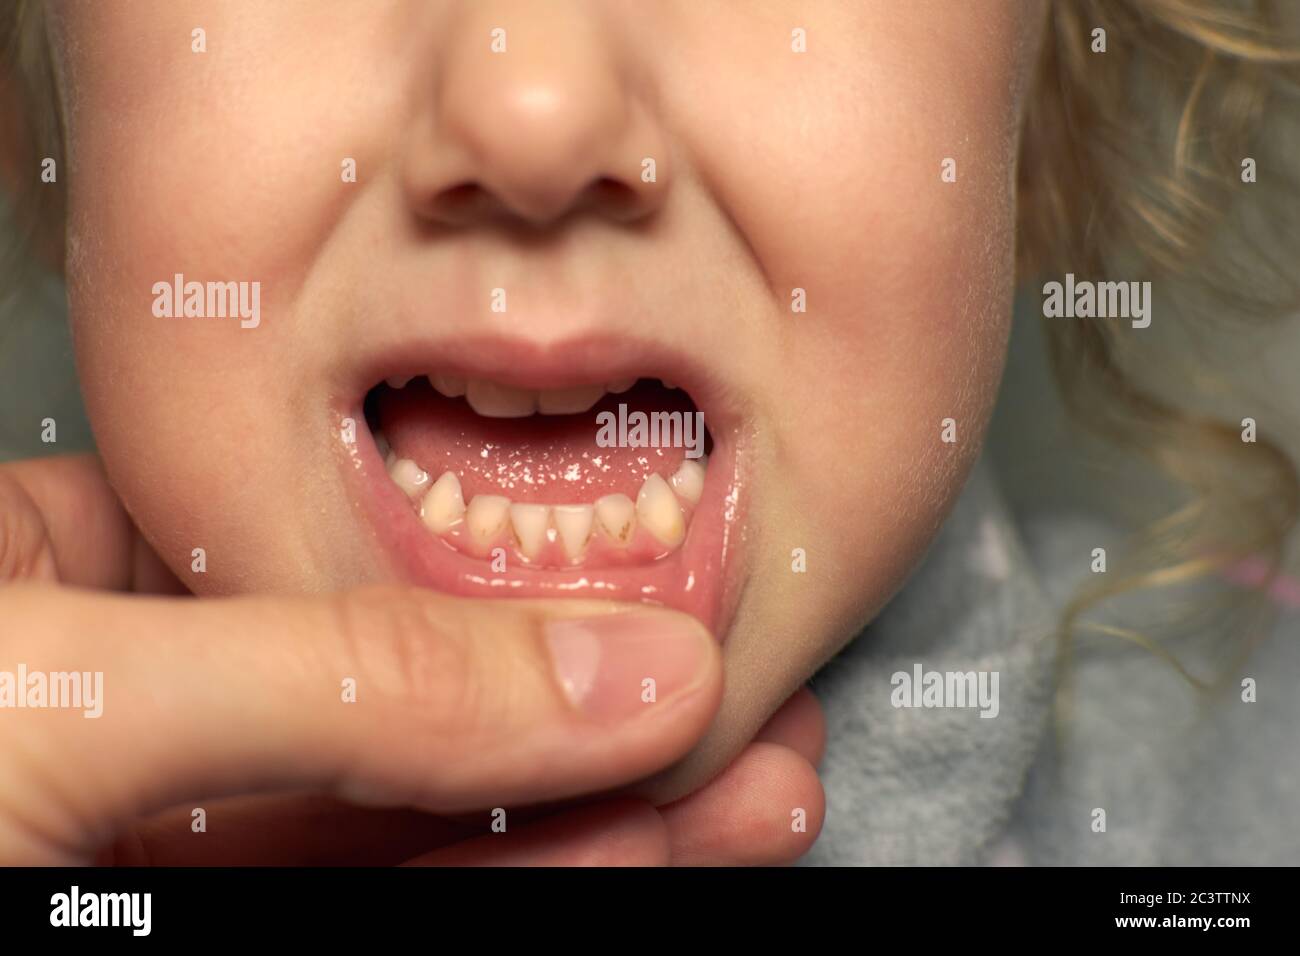 Close up of unhealthy baby teeth. Girl open mouth showing caries teeth decay, bad teeth. Stock Photo